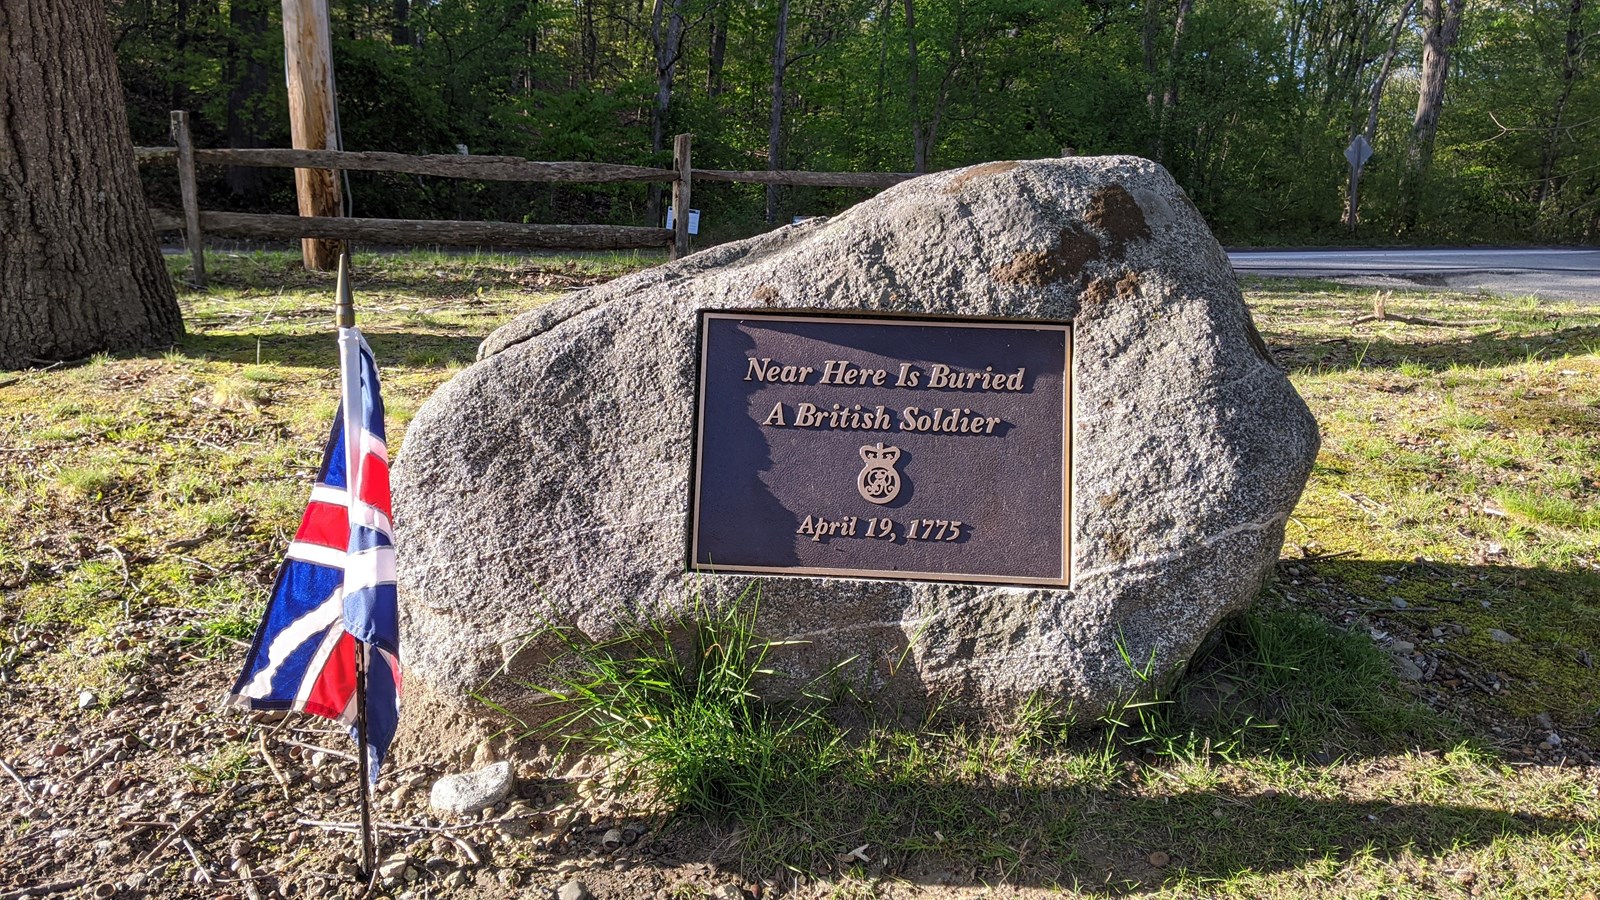 A stone grave marker for a British soldier with metal plaque sits in low grass next to a modern road